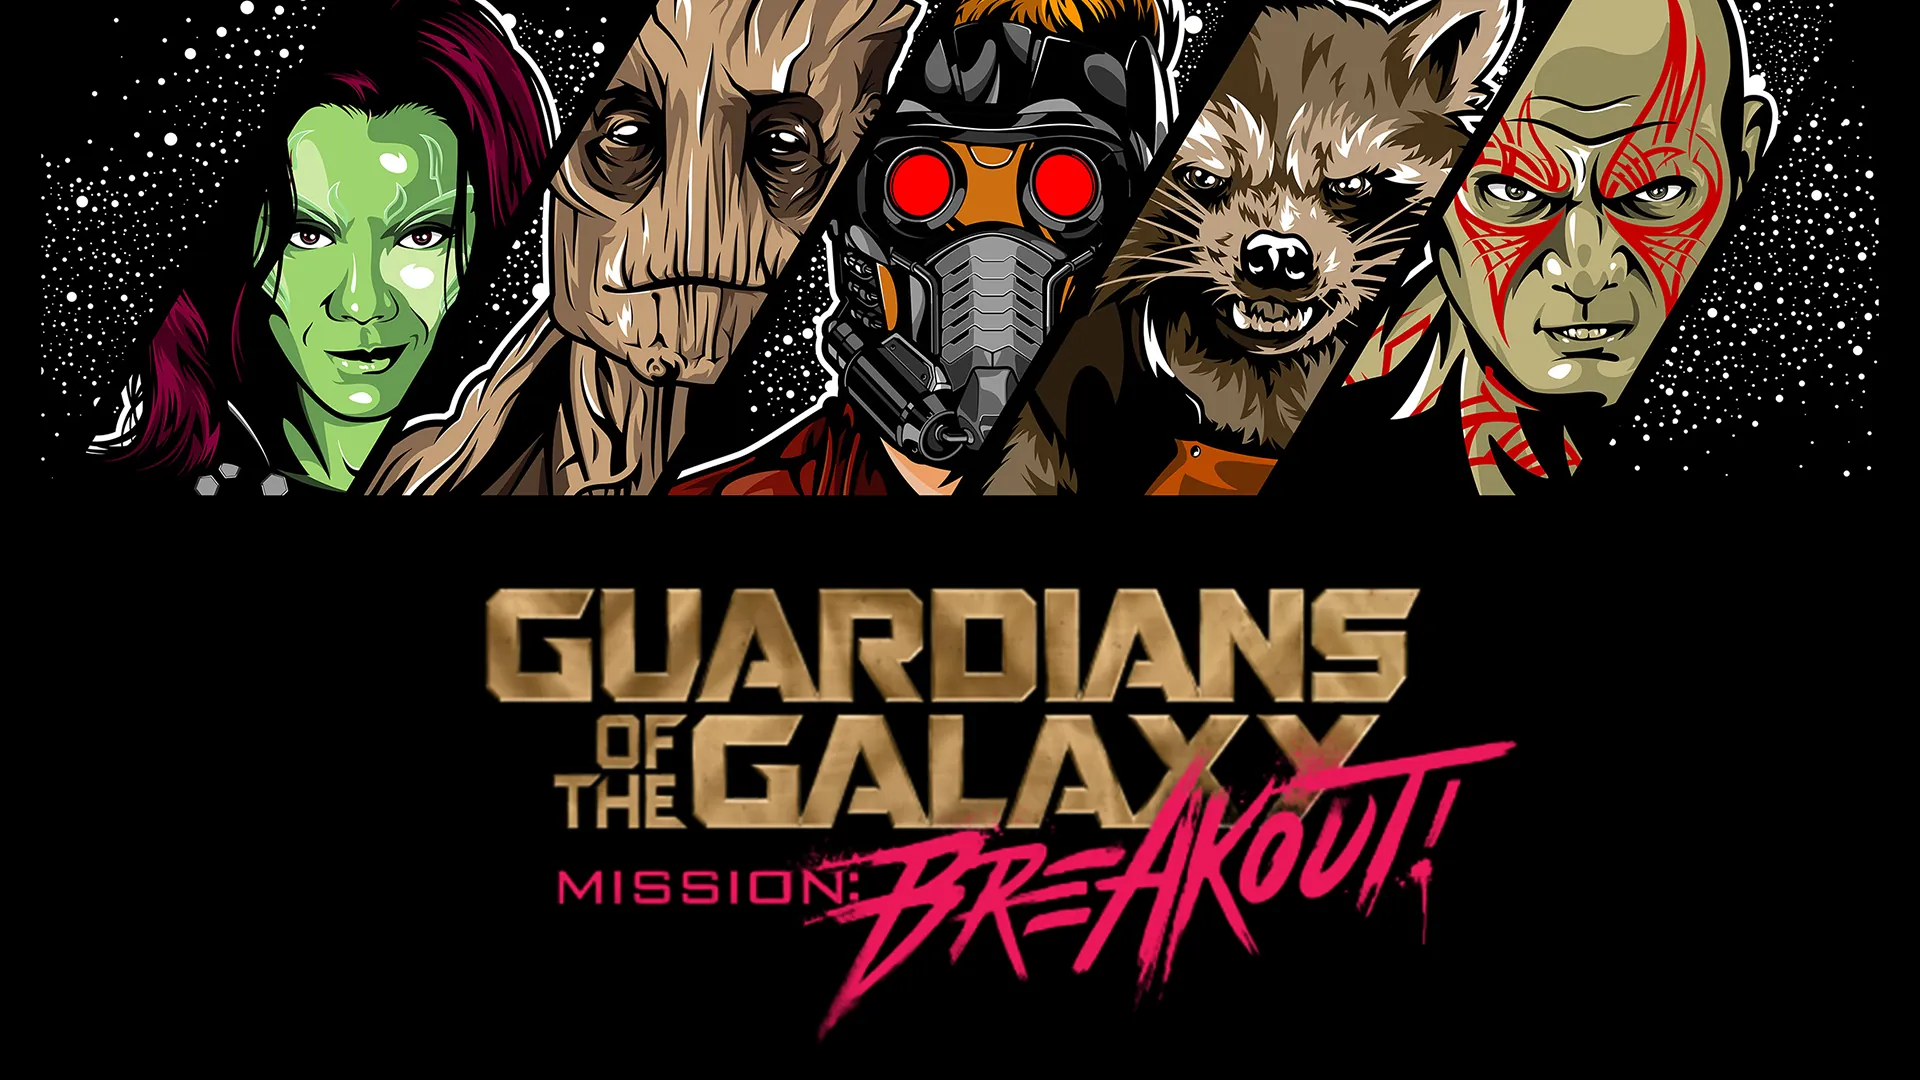 Guardians of the Galaxy Season 3 Mission Breakout Hindi Episodes Download FHD Rare Toons India